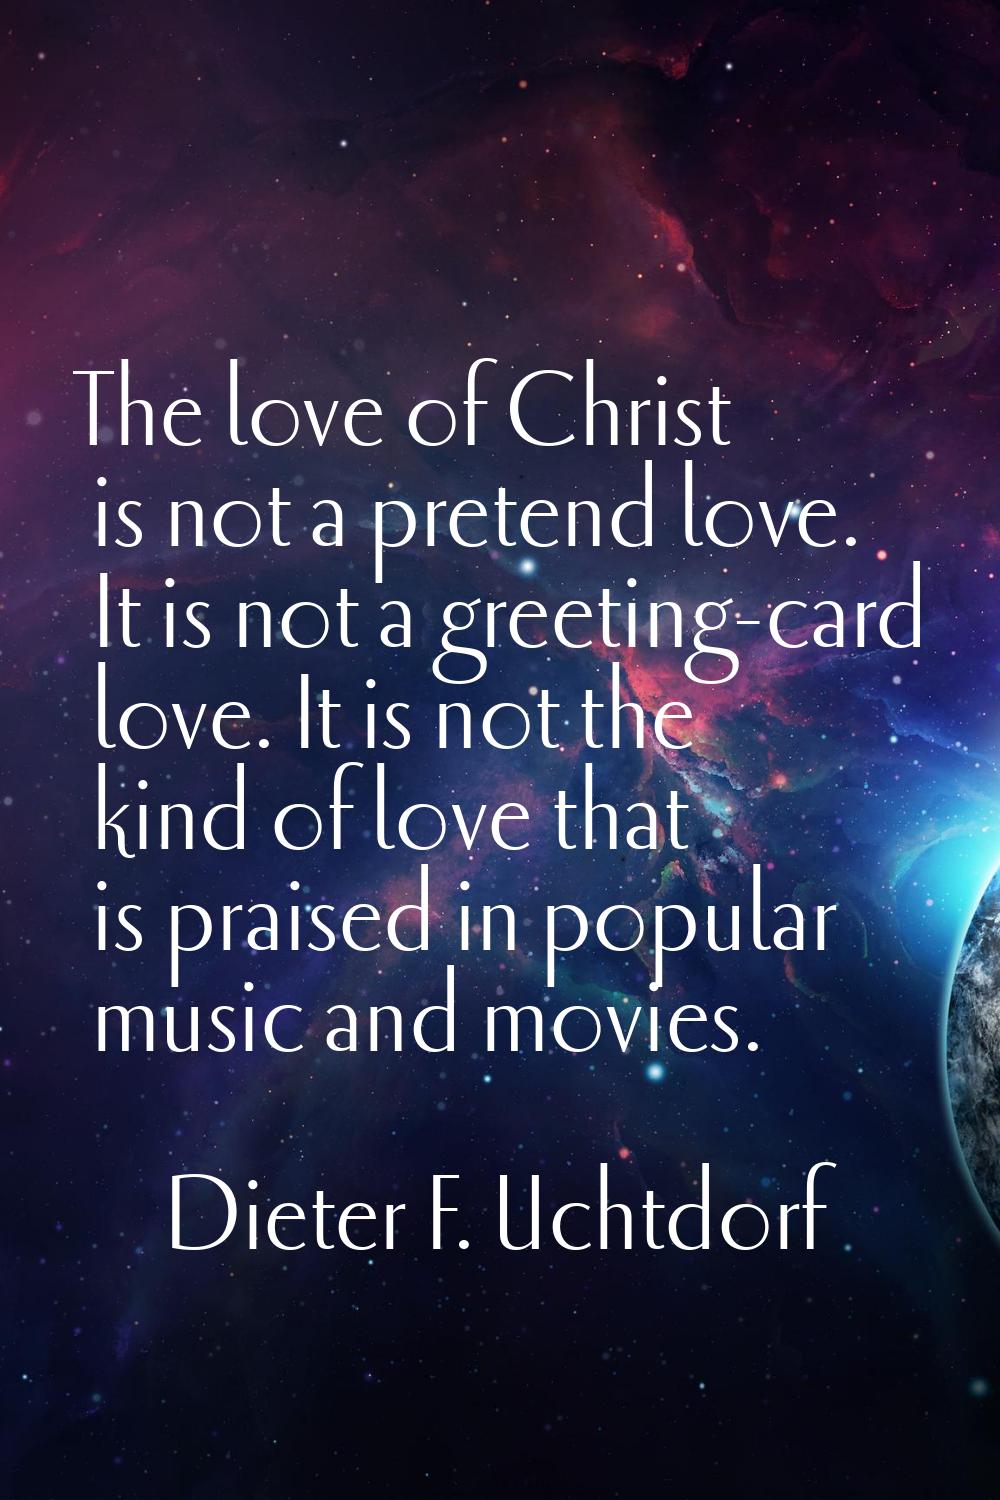 The love of Christ is not a pretend love. It is not a greeting-card love. It is not the kind of lov